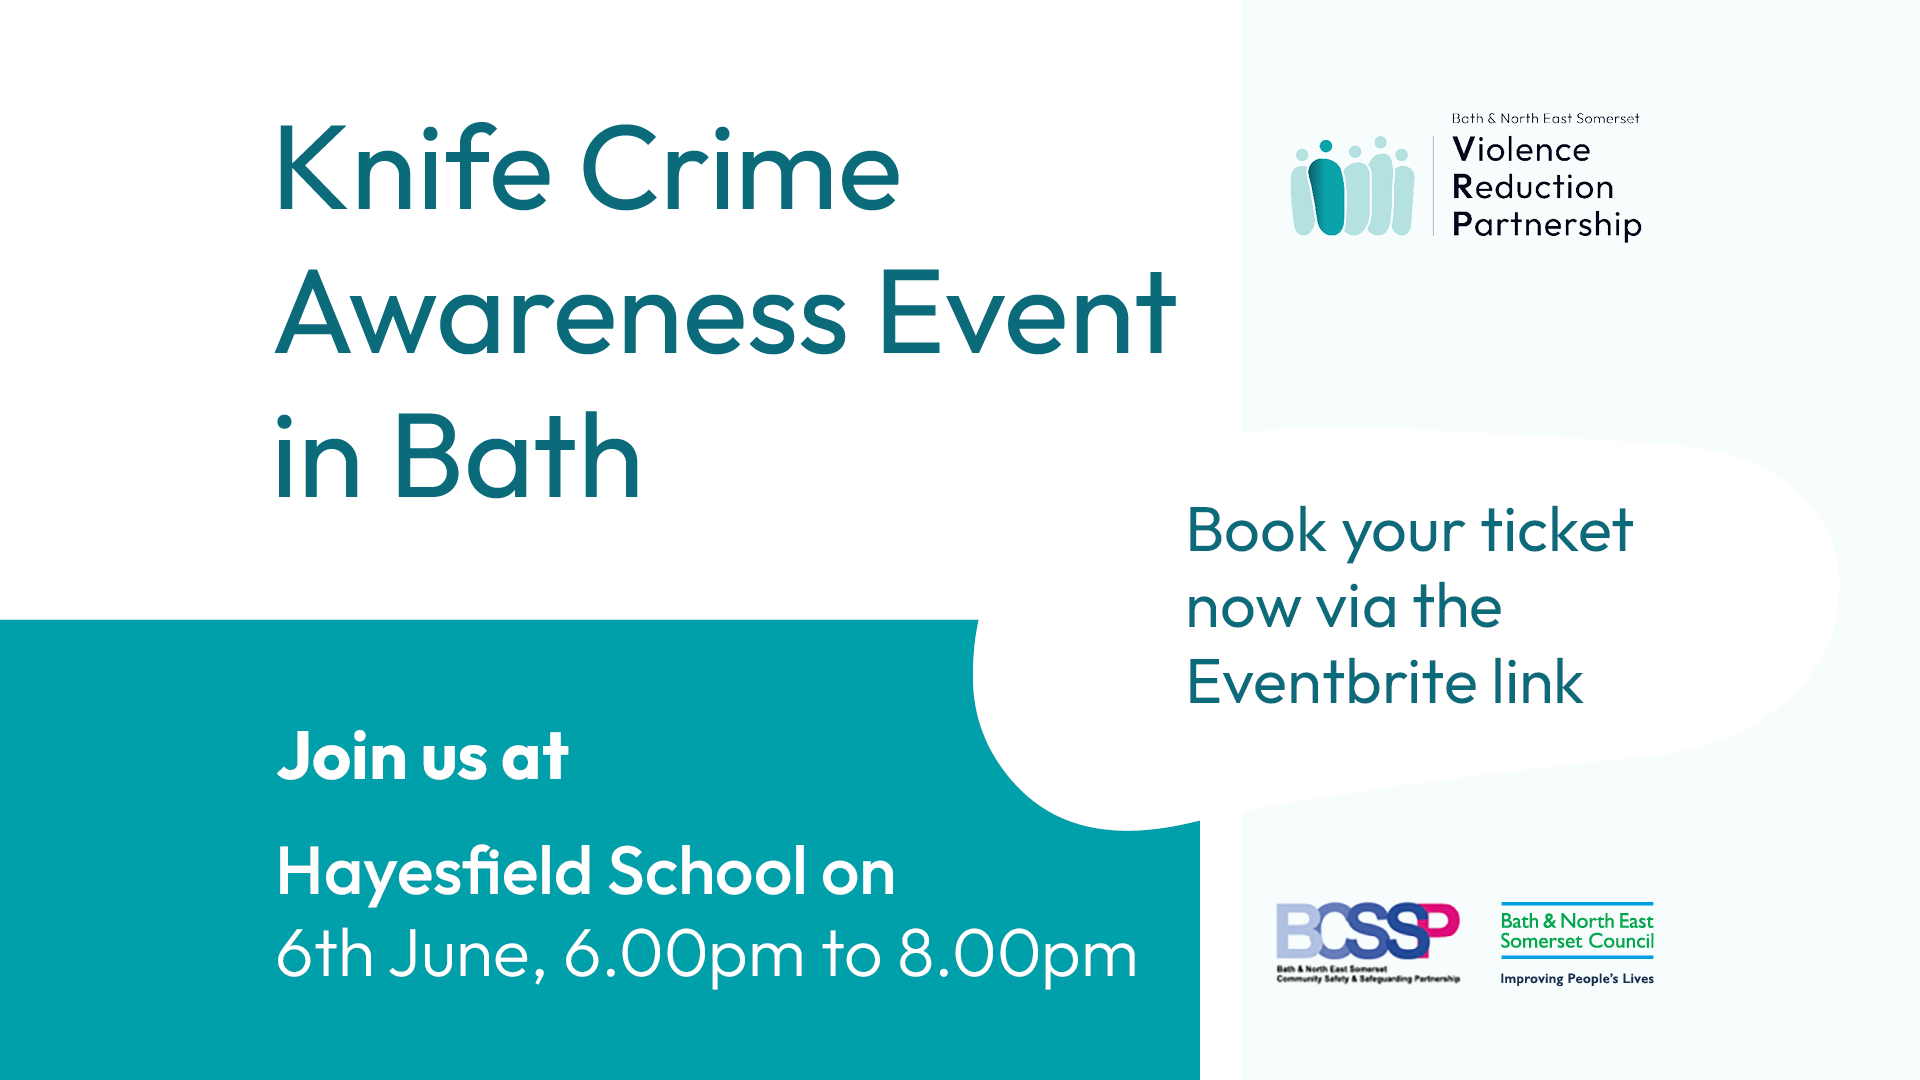 Graphic showing details of a knife crime awareness event in Bath on 6 June from 6pm-8pm. The eventbrite link to book tickets is knifeawareness.eventbrite.co.uk